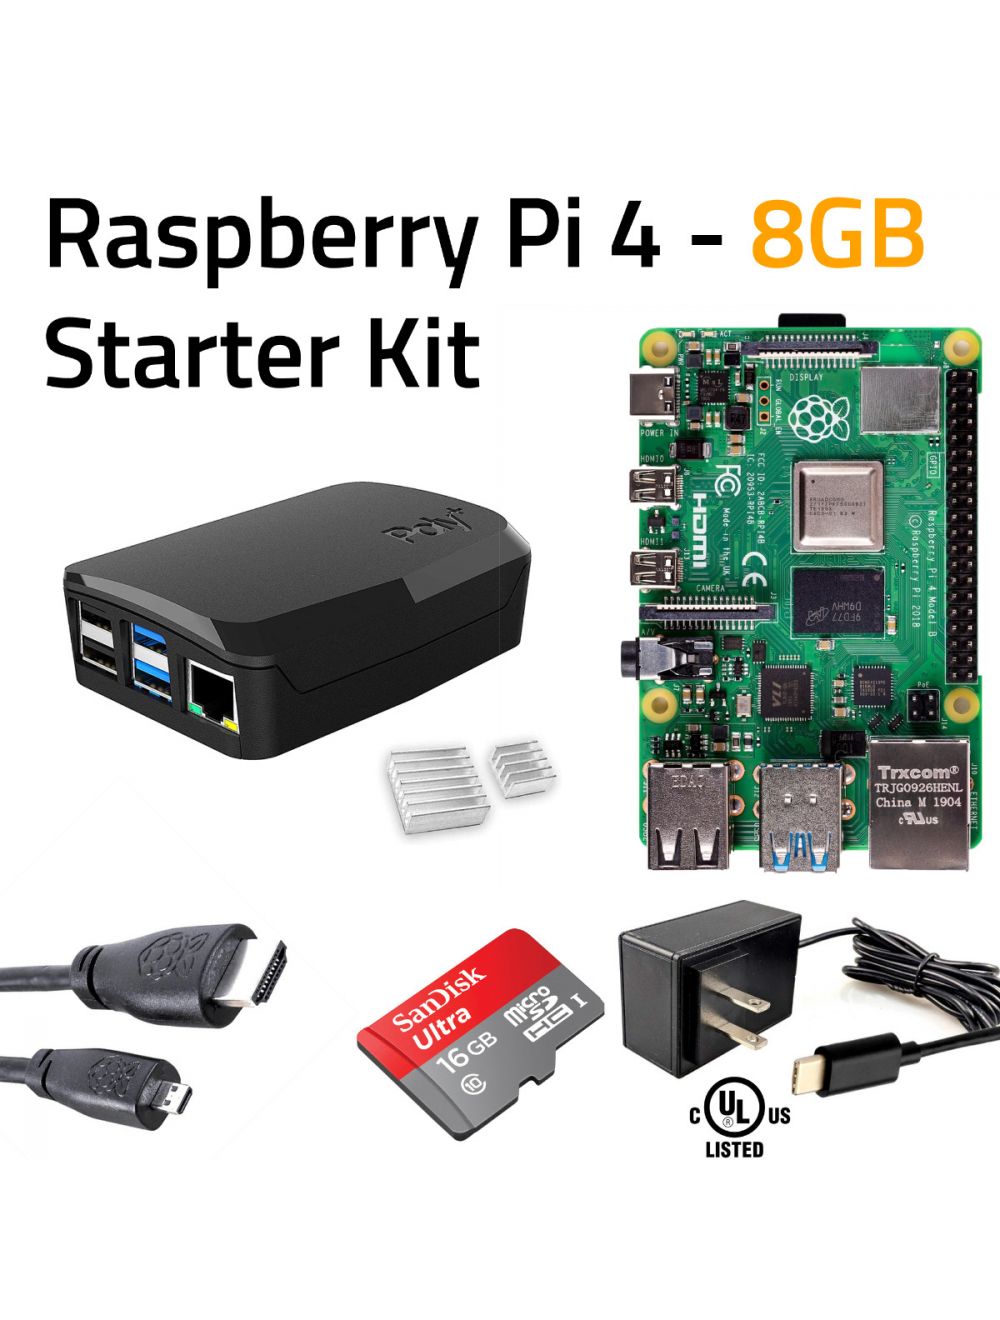 PC/タブレット その他 MakerBright Raspberry Pi 4 Starter Kit (8GB)